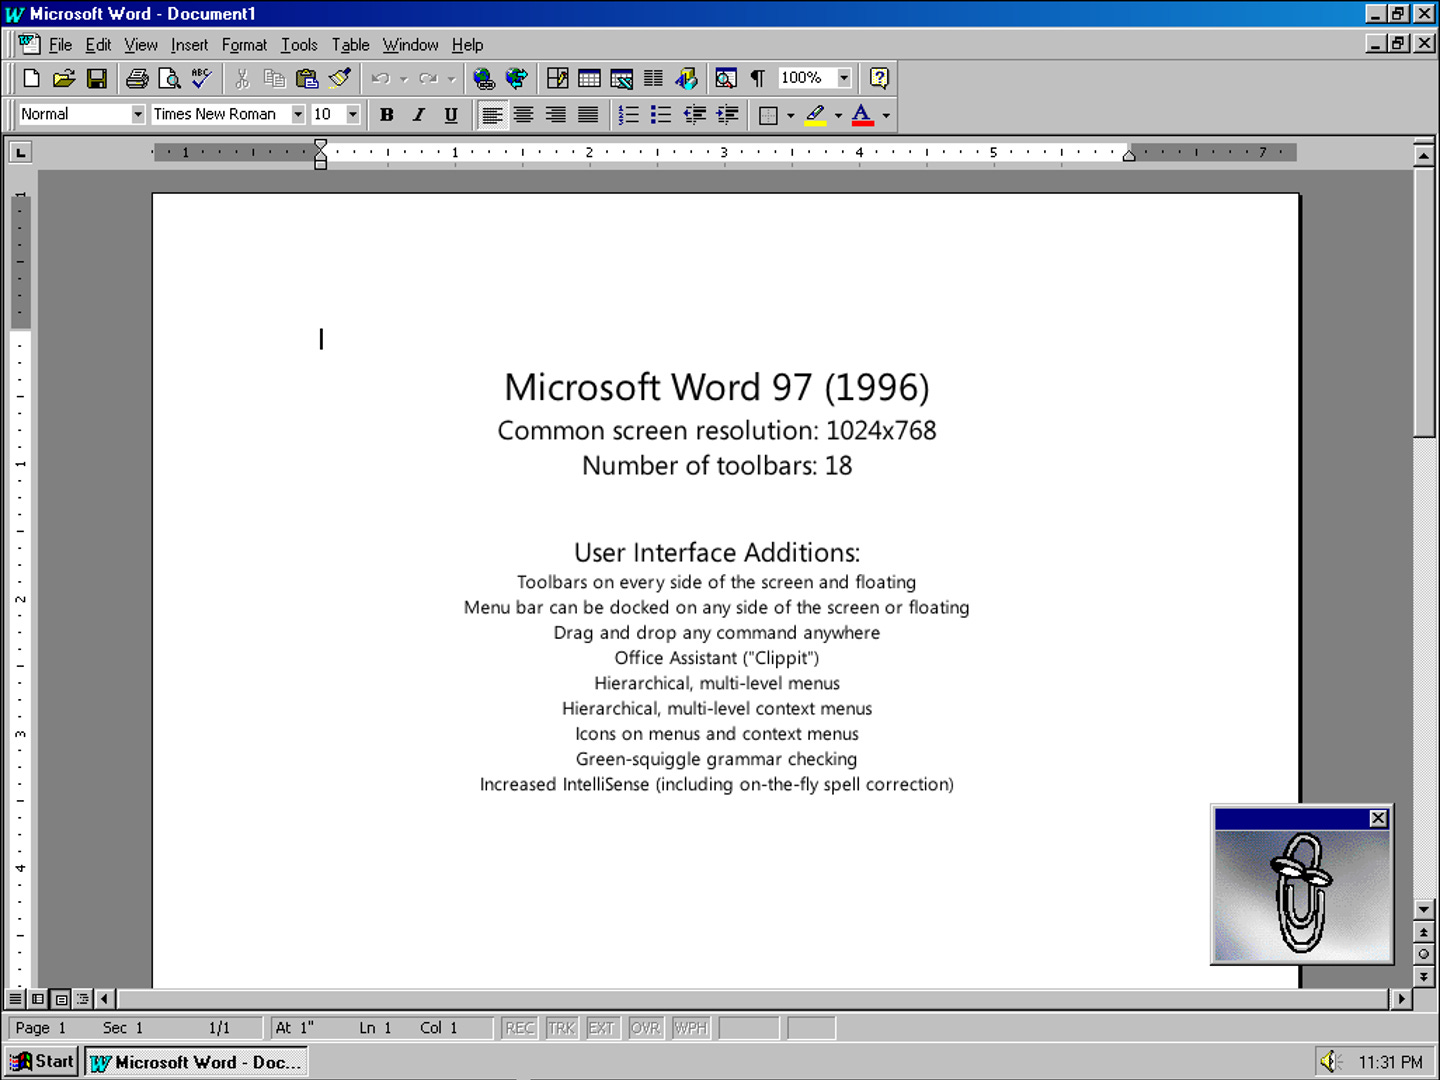 Microsoft Word 97 (1996) Common screen resolution: 1024x768 Number of toolbars: 18 User Interface Additions: Toolbars on every side of the screen and floating Menu bar can be docked on any side of the screen or floating Drag and drop any command anywhere Office Assistant ("Clippit") Hierarchical, multi-level menus Hierarchical, multi-level context menus Icons on menus and context menus Green-squiggle grammar checking Increased IntelliSense (including on-the-fly spell correction)